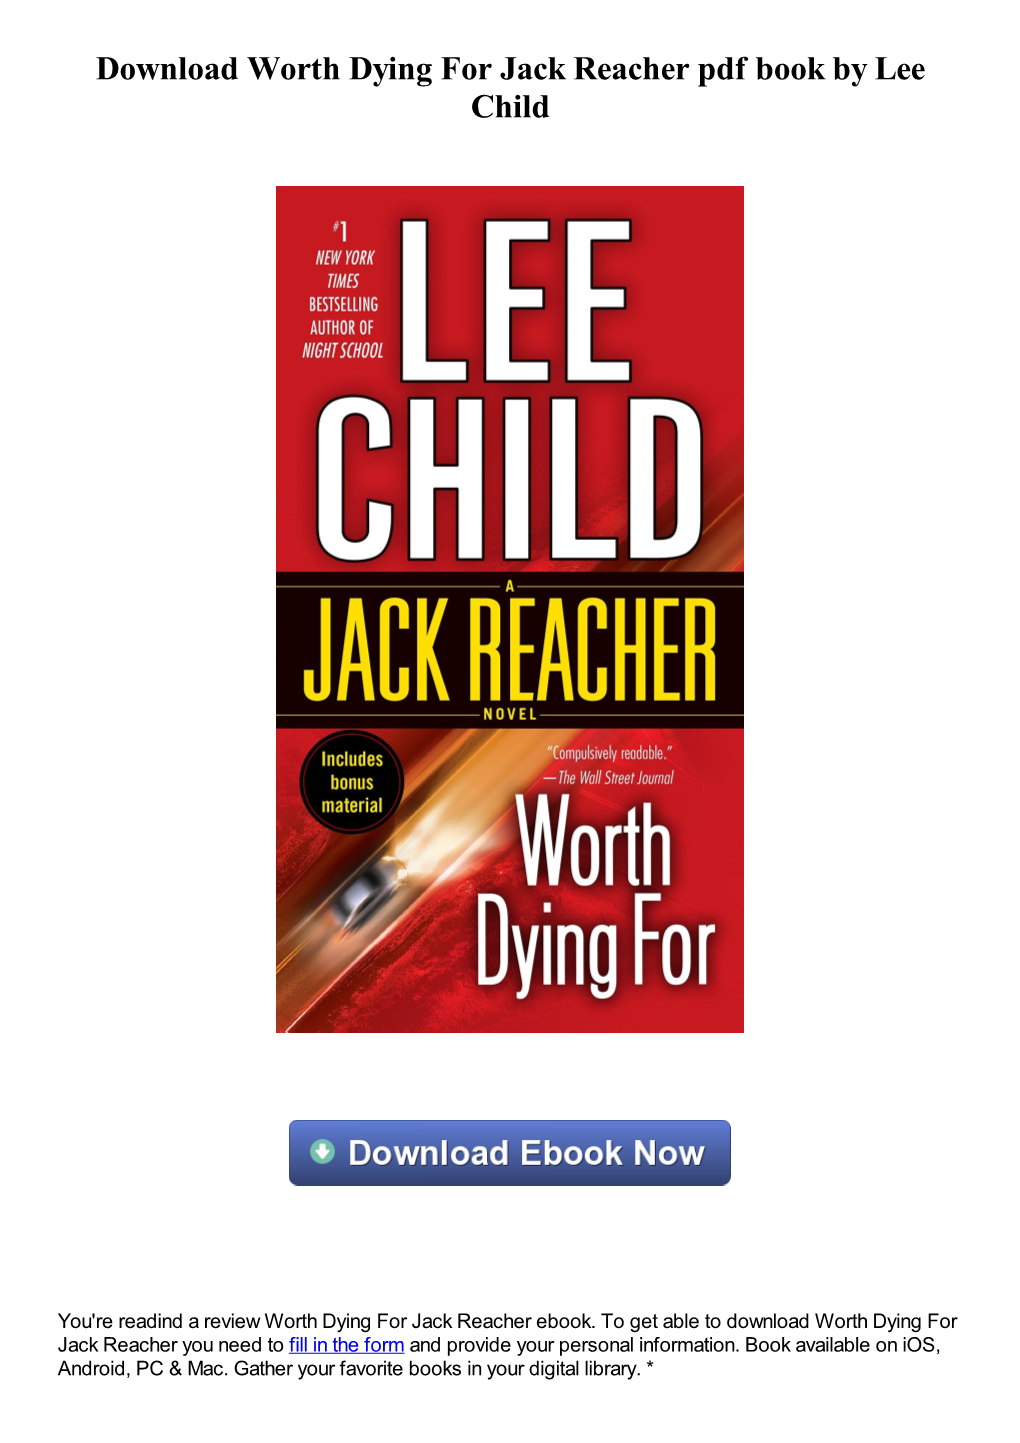 Download Worth Dying for Jack Reacher Pdf Book by Lee Child